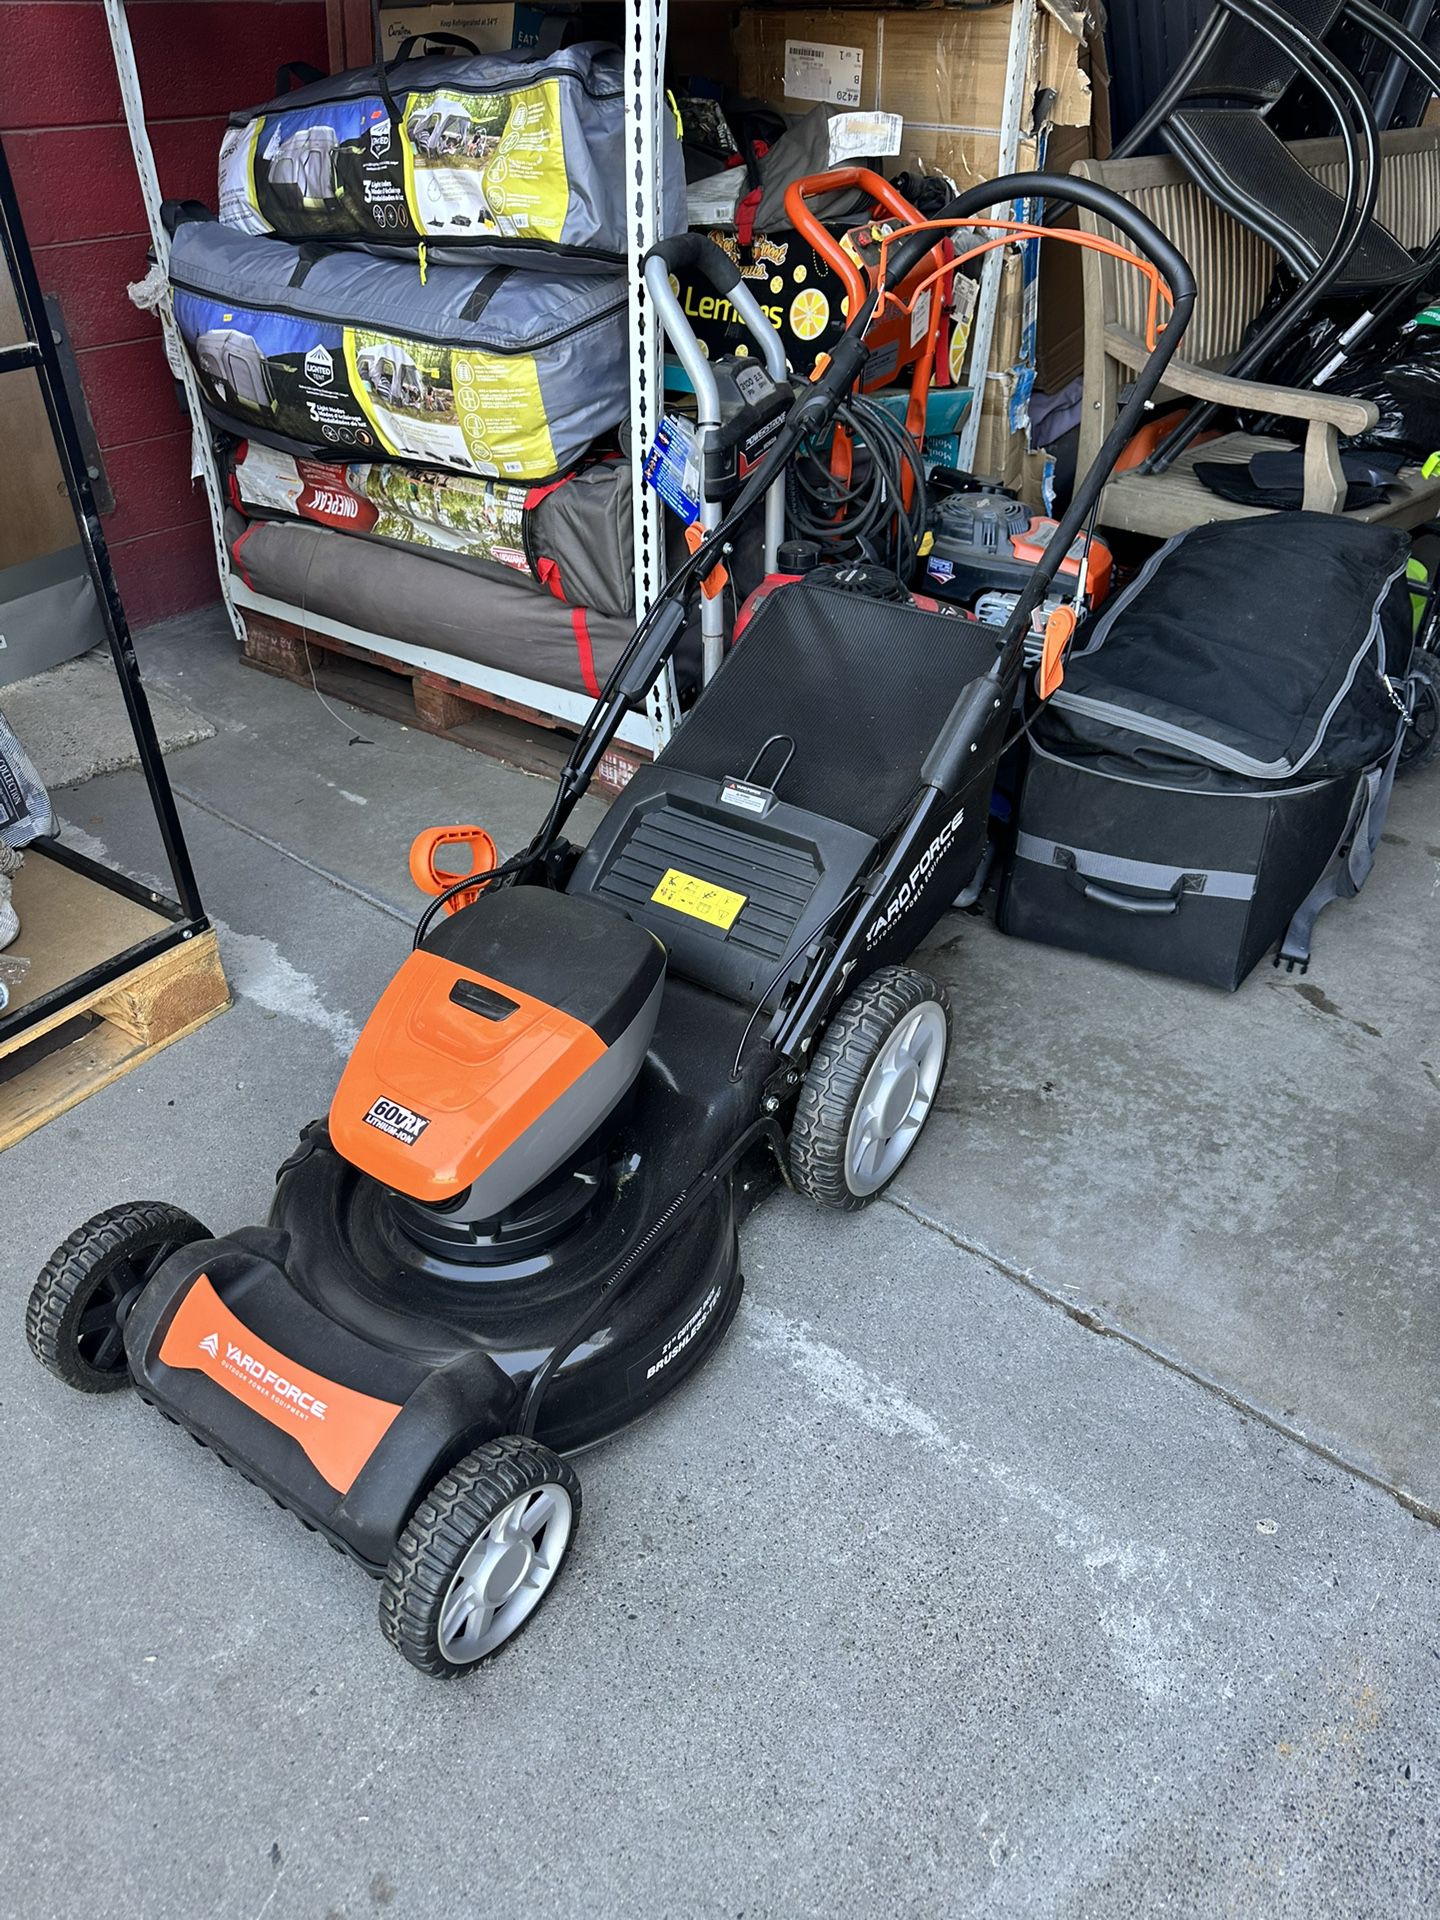 Yardforce 60v Self-Propelled Mower with 2 4Ah Batteries, Rapid Charger 